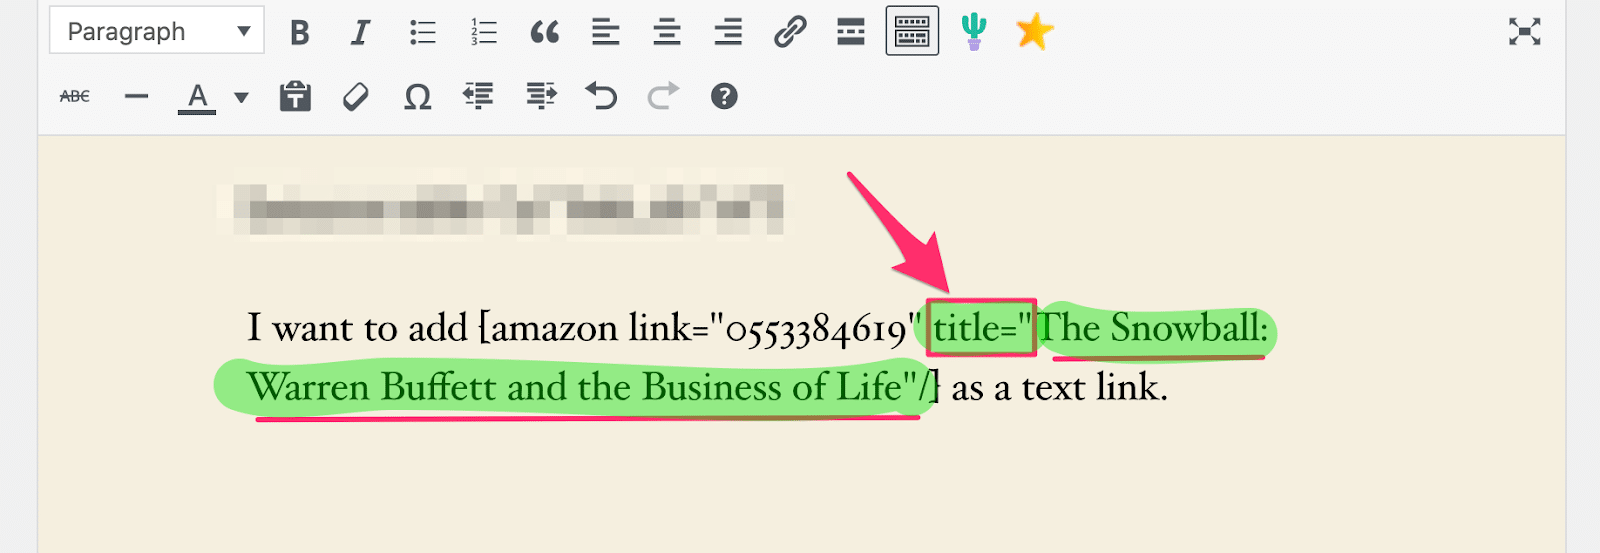 adding a title to your link to find it easier